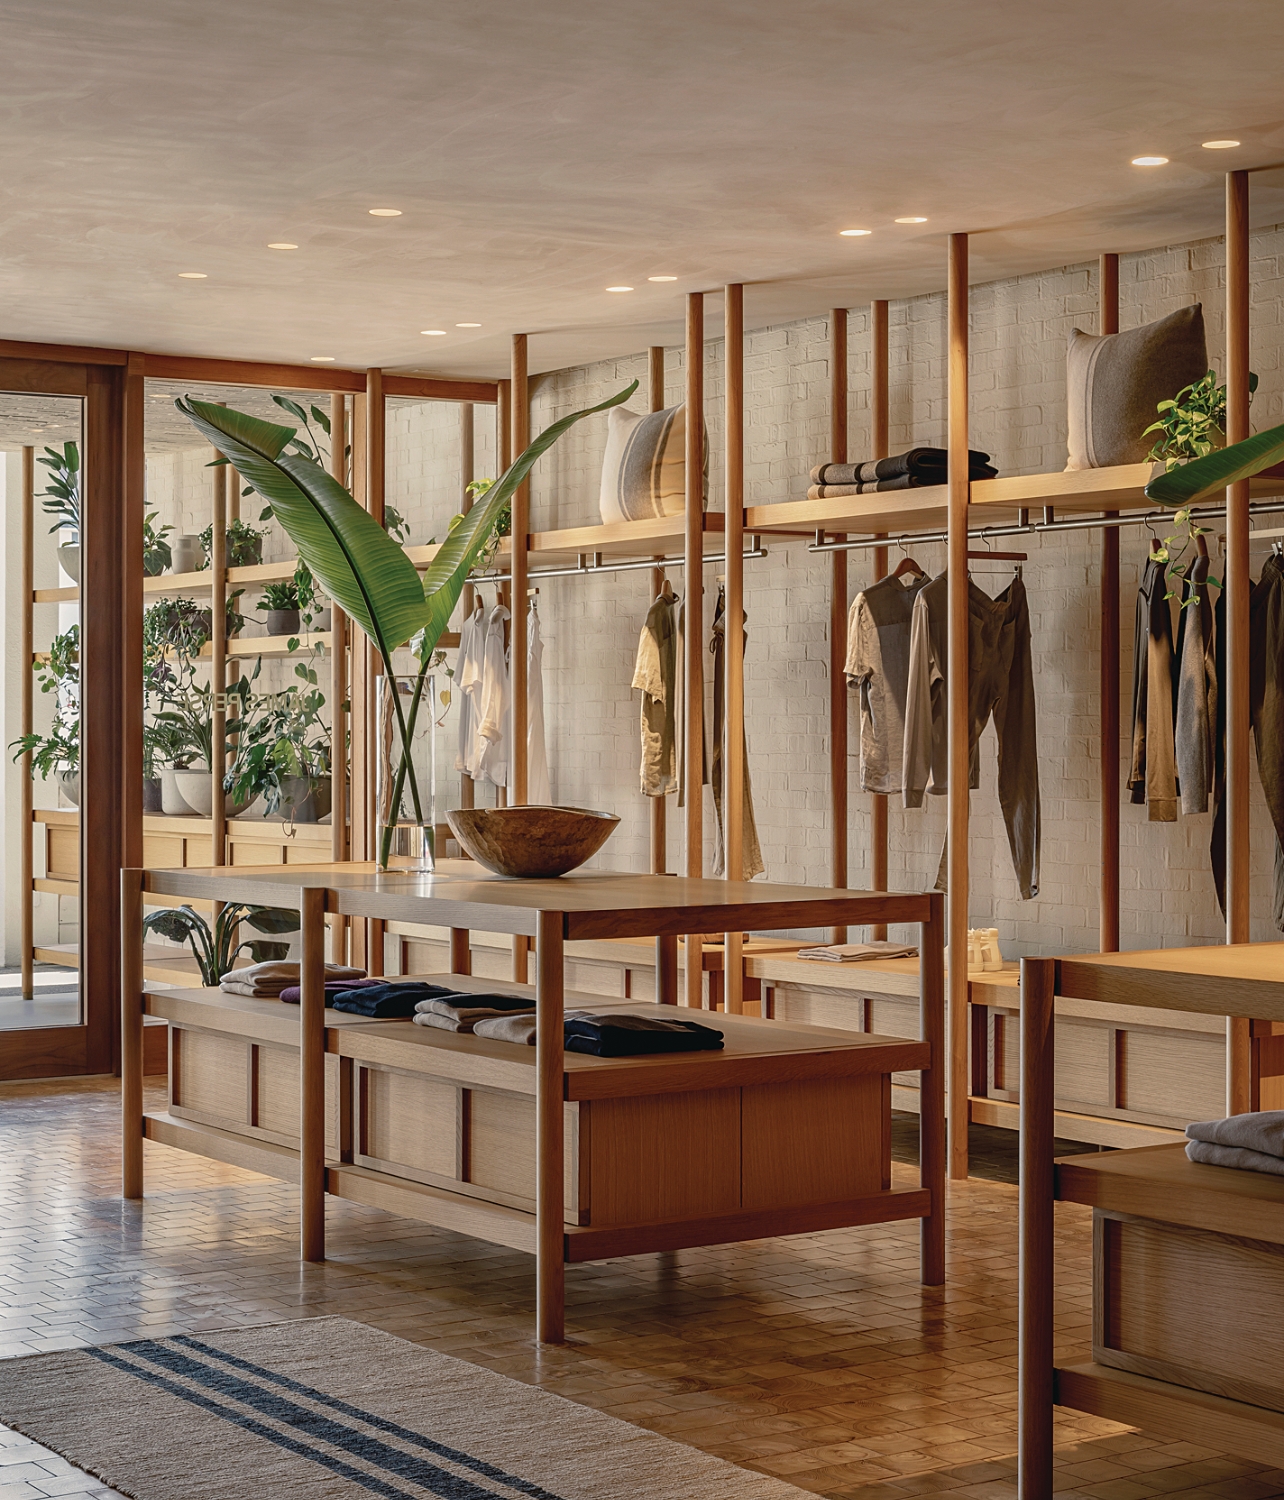 Interior image of the James Perse store at Bal Harbour Shops